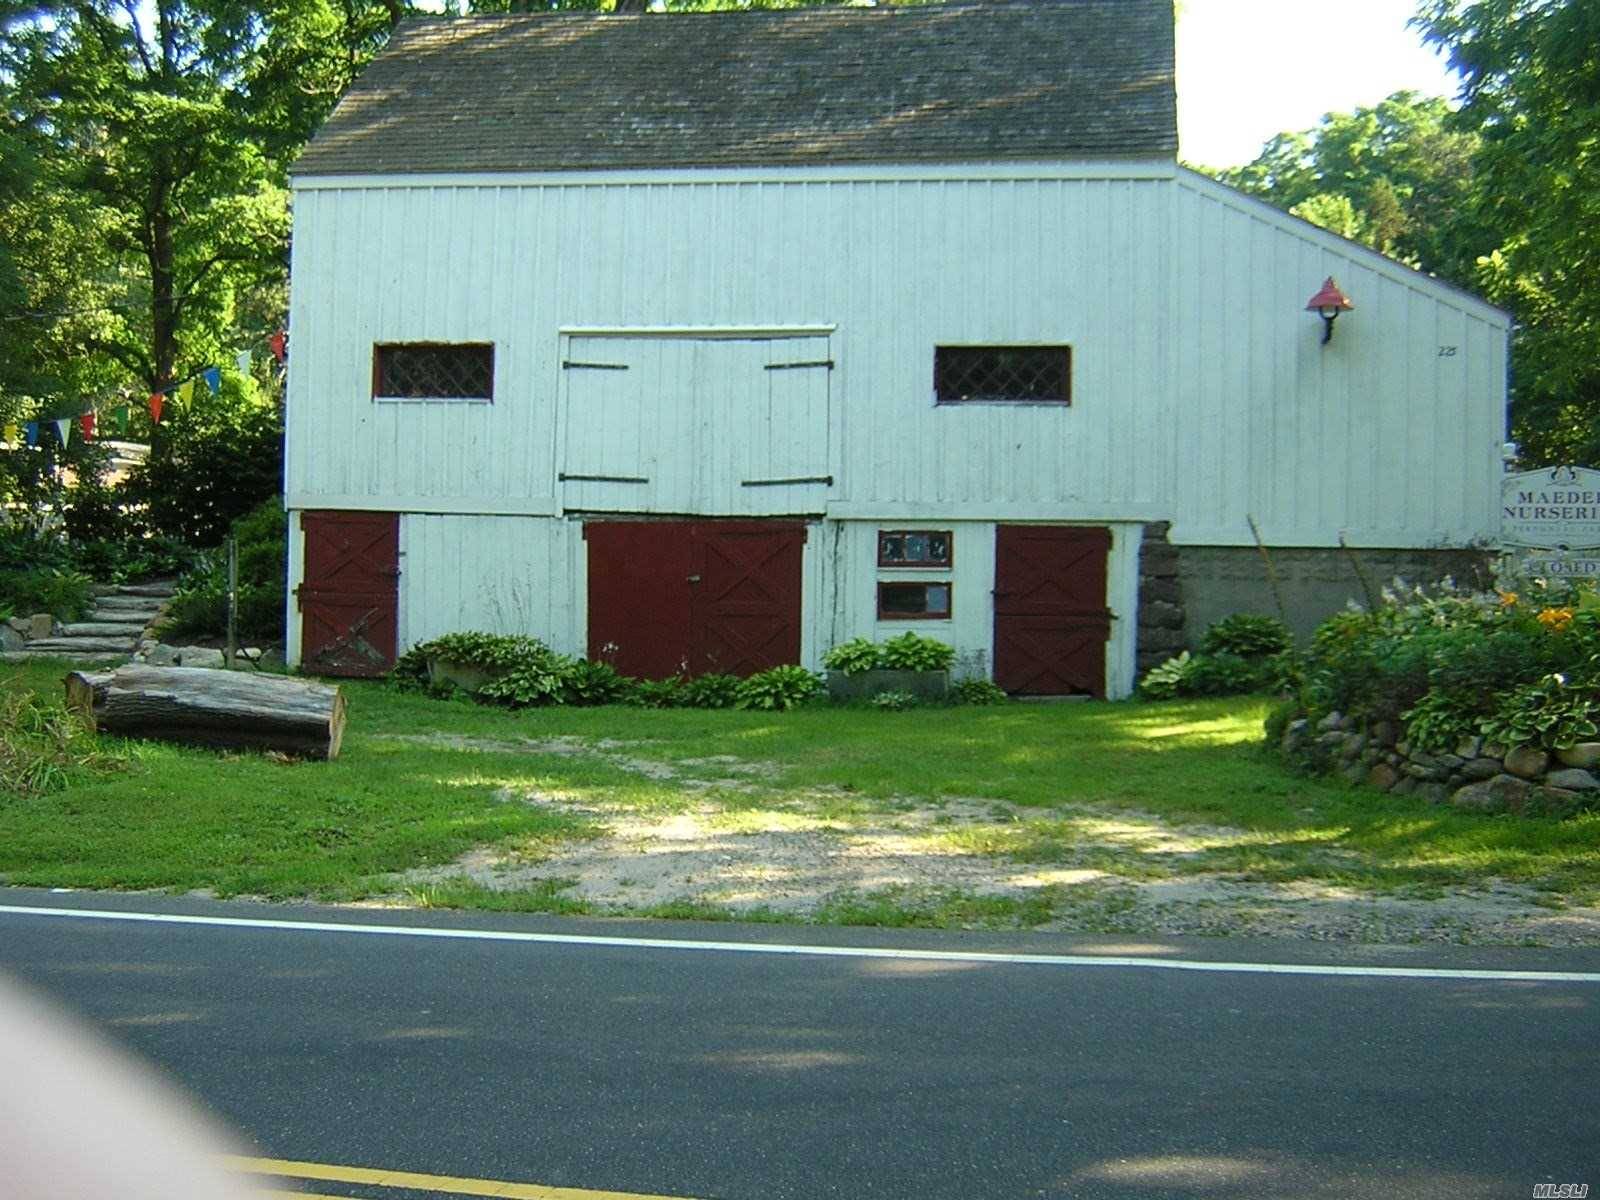 Historic barn on approximately 3 4 acre.